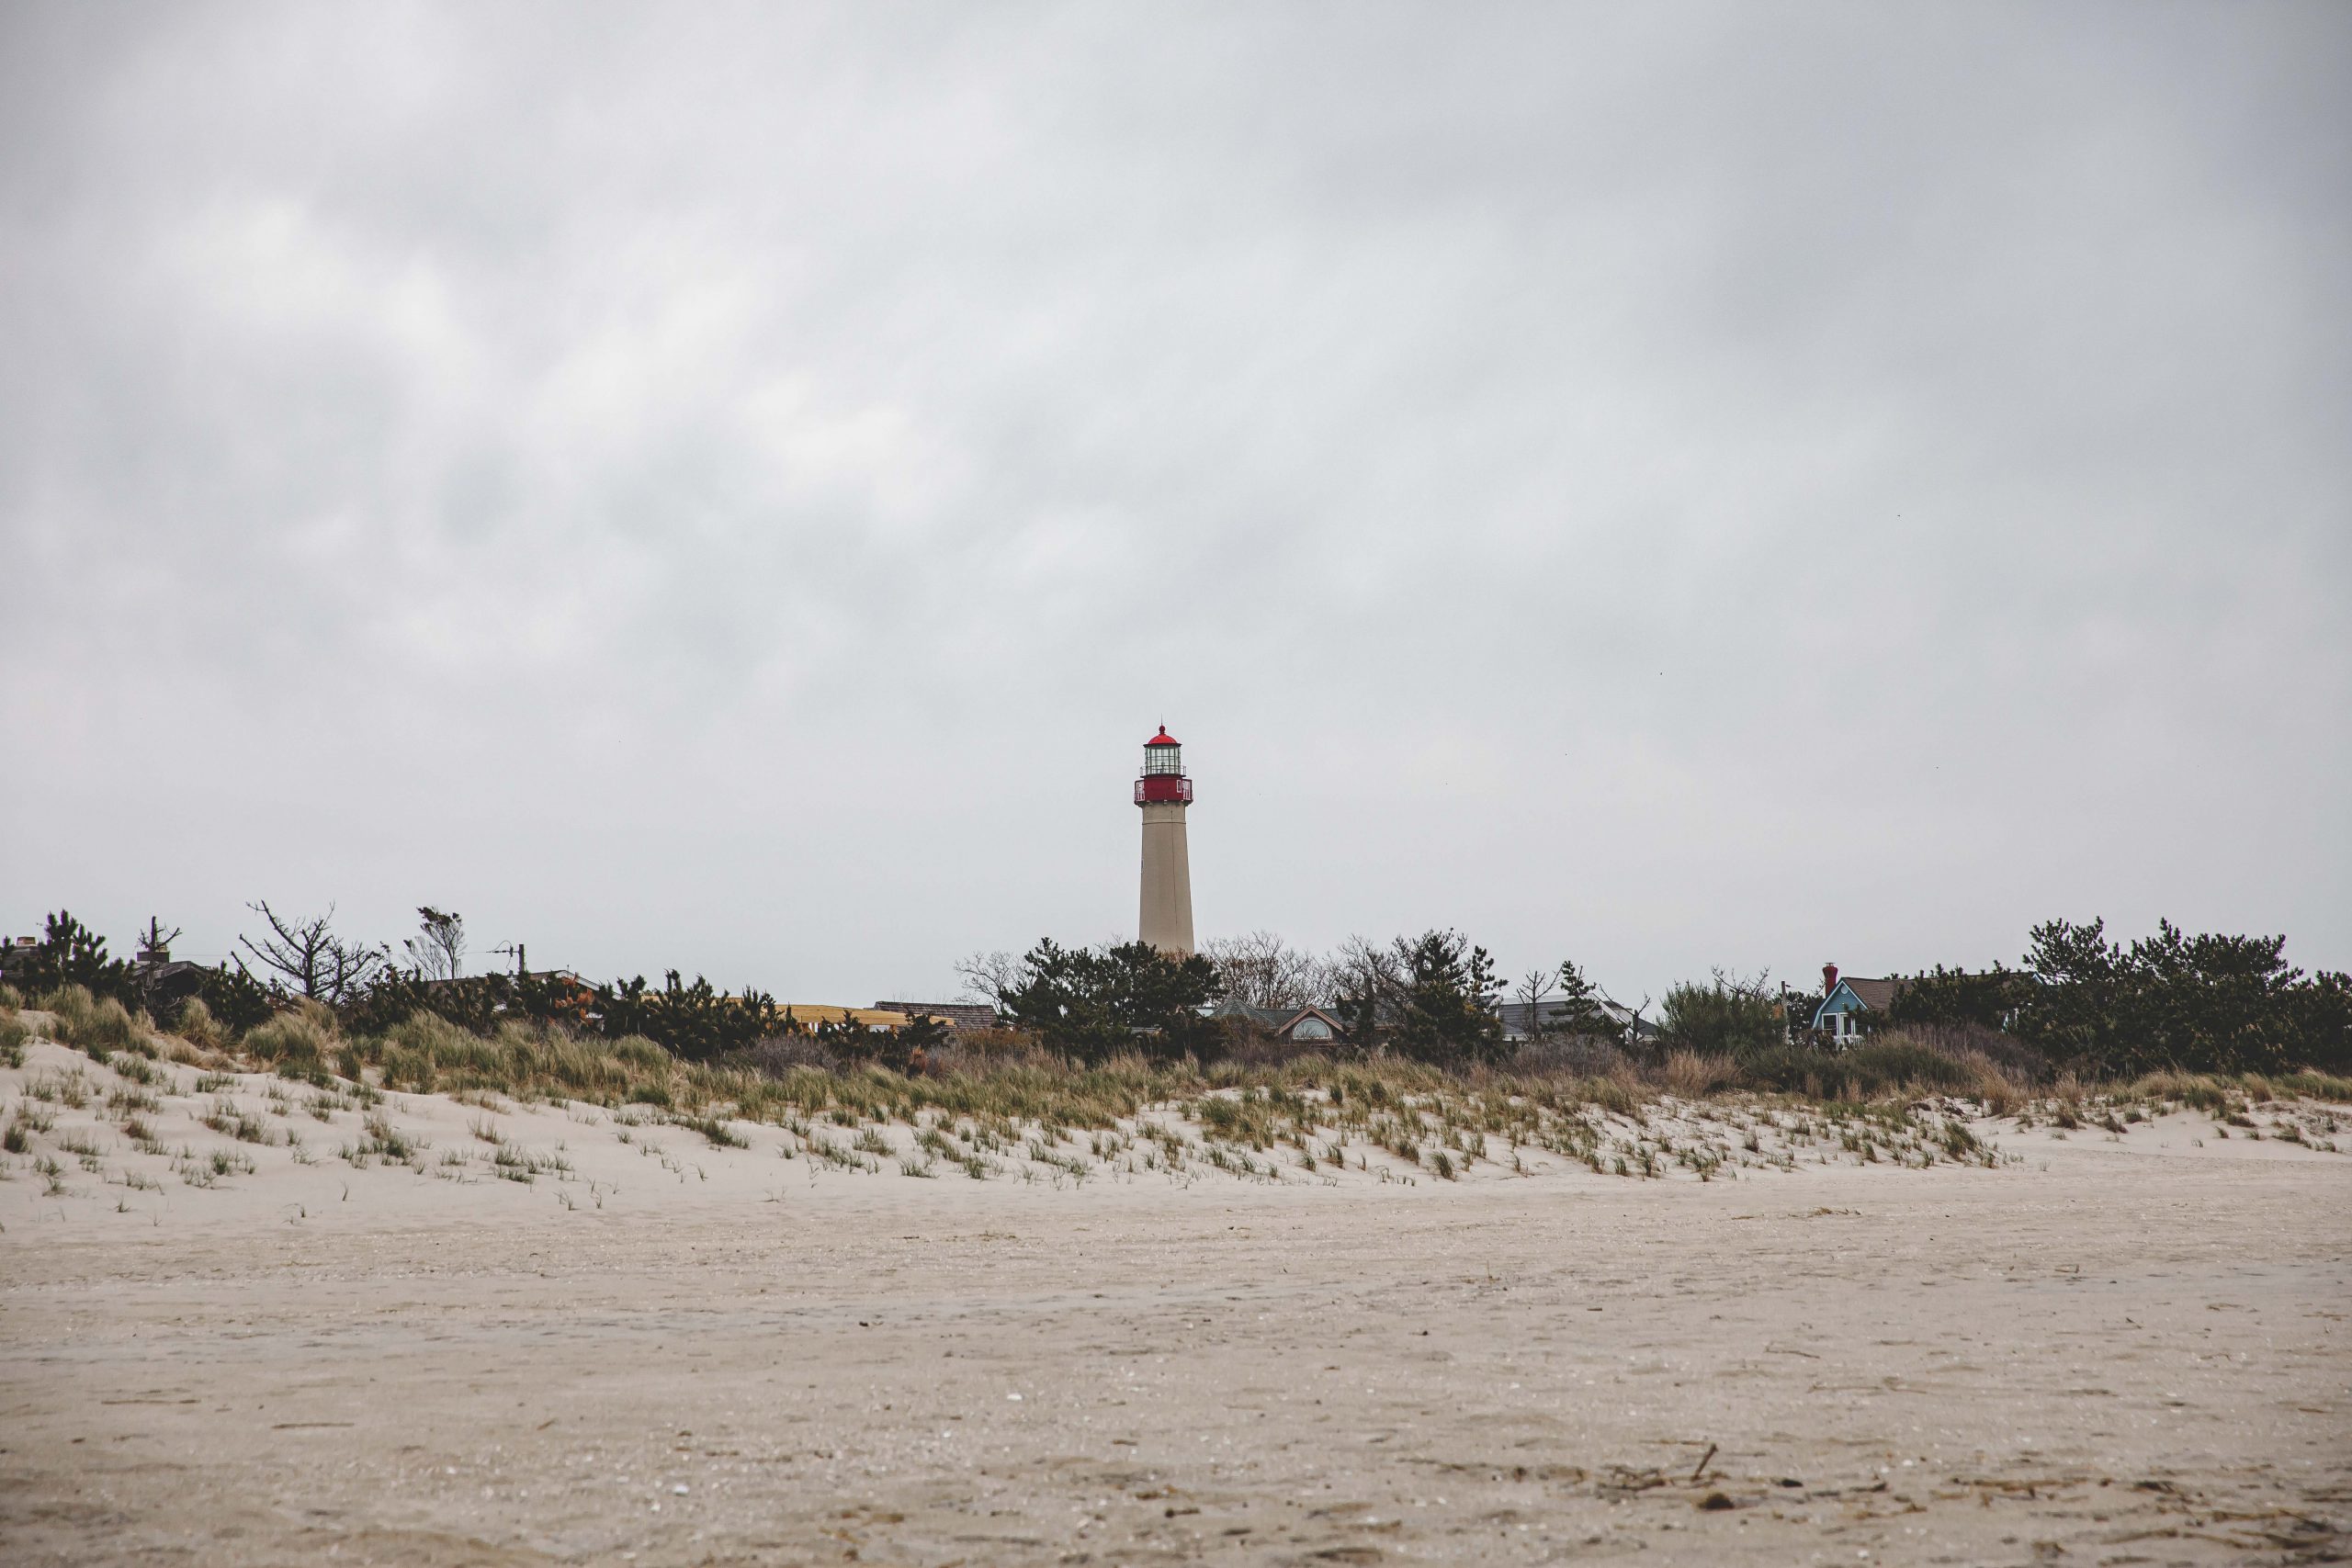 engagement session at cape may